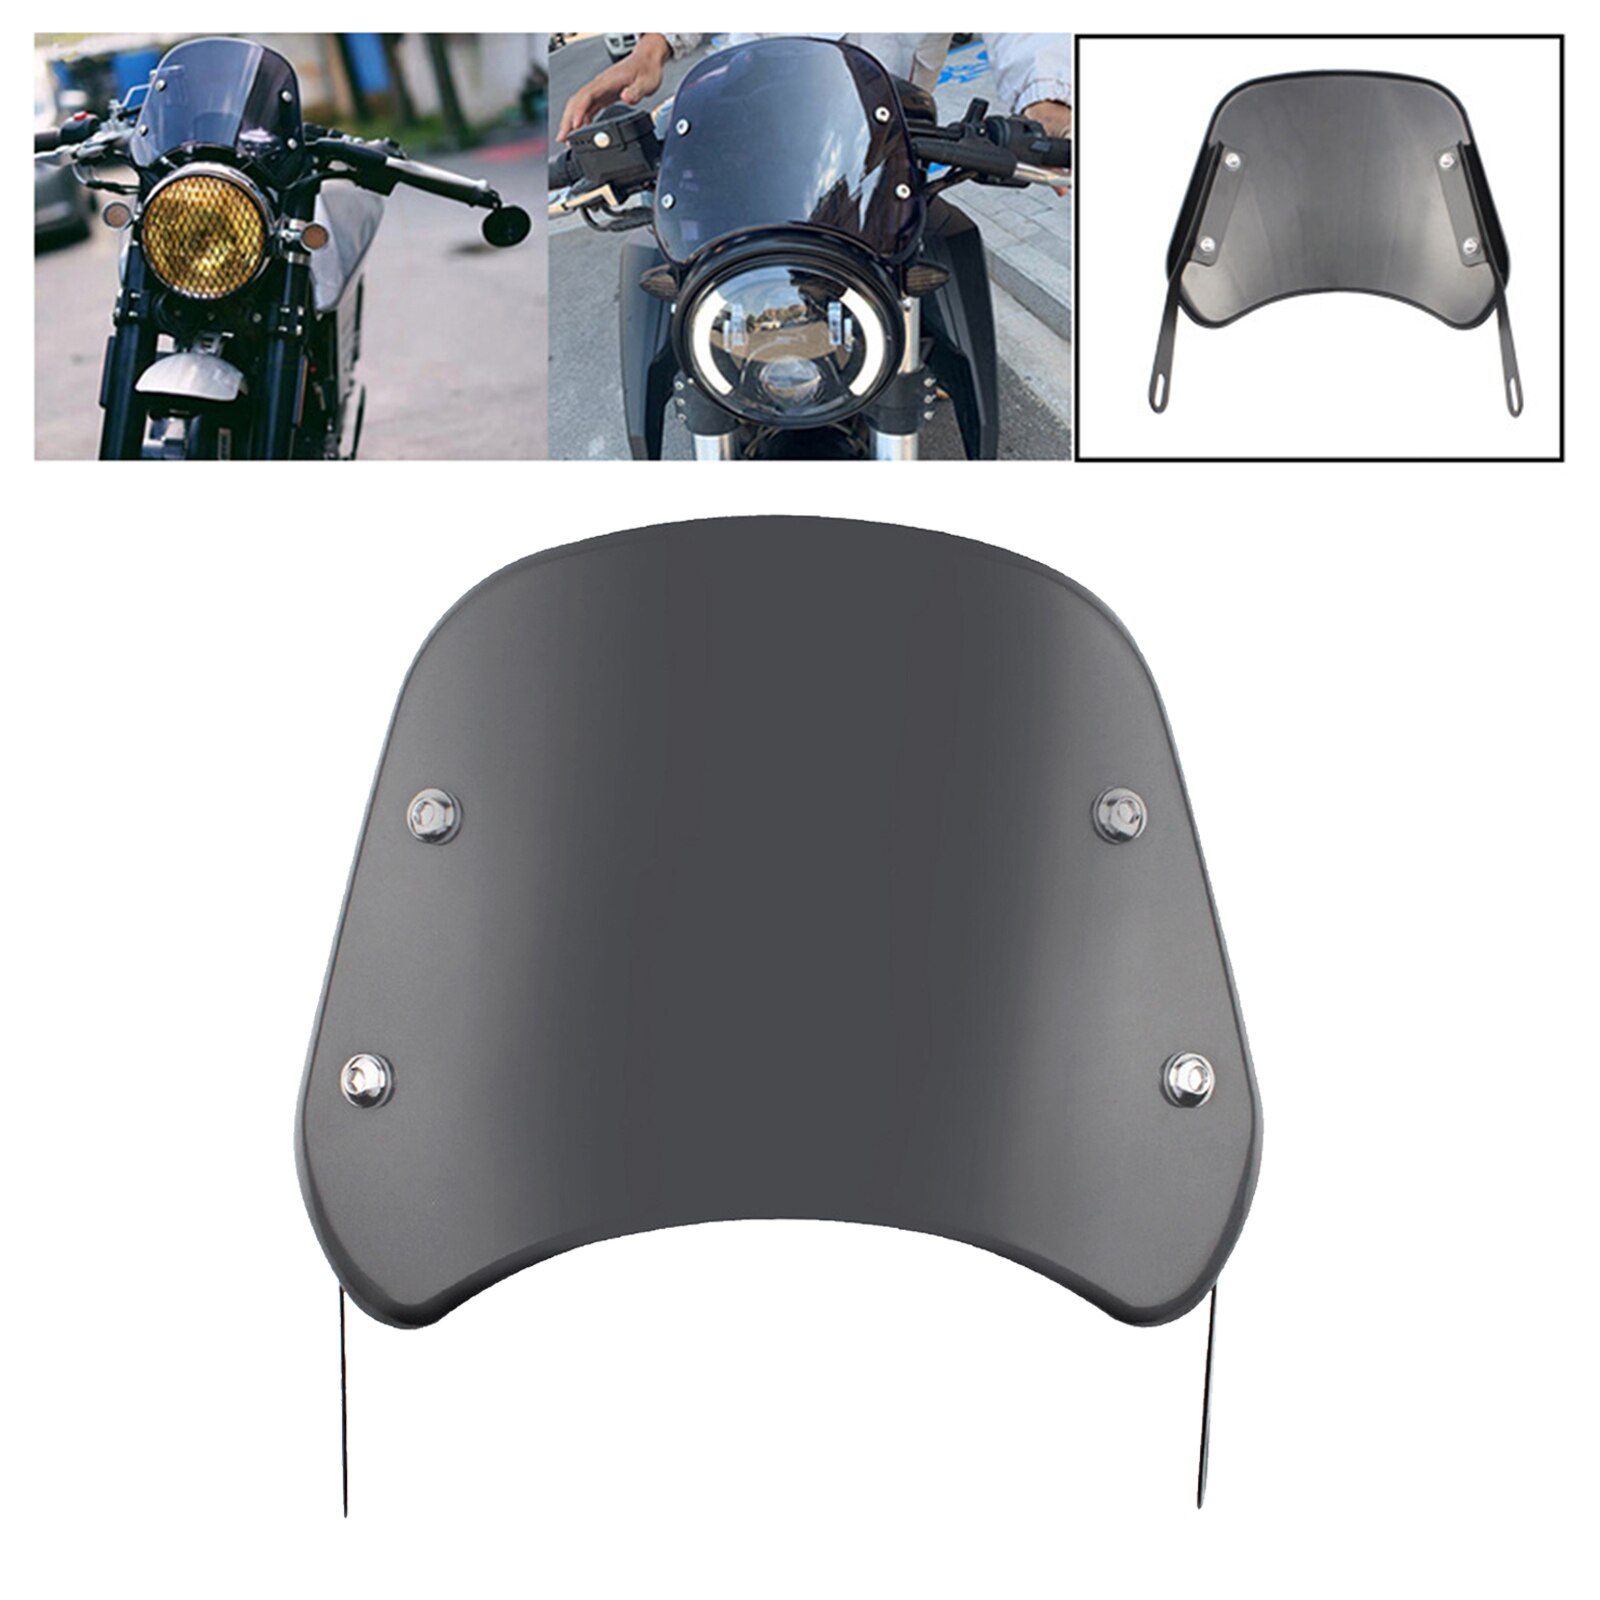 Front 5-7 inch Motorcycle Headlight Windshield Wind Deflector Windscreen Universal for Motorbike Compact Replacement Parts